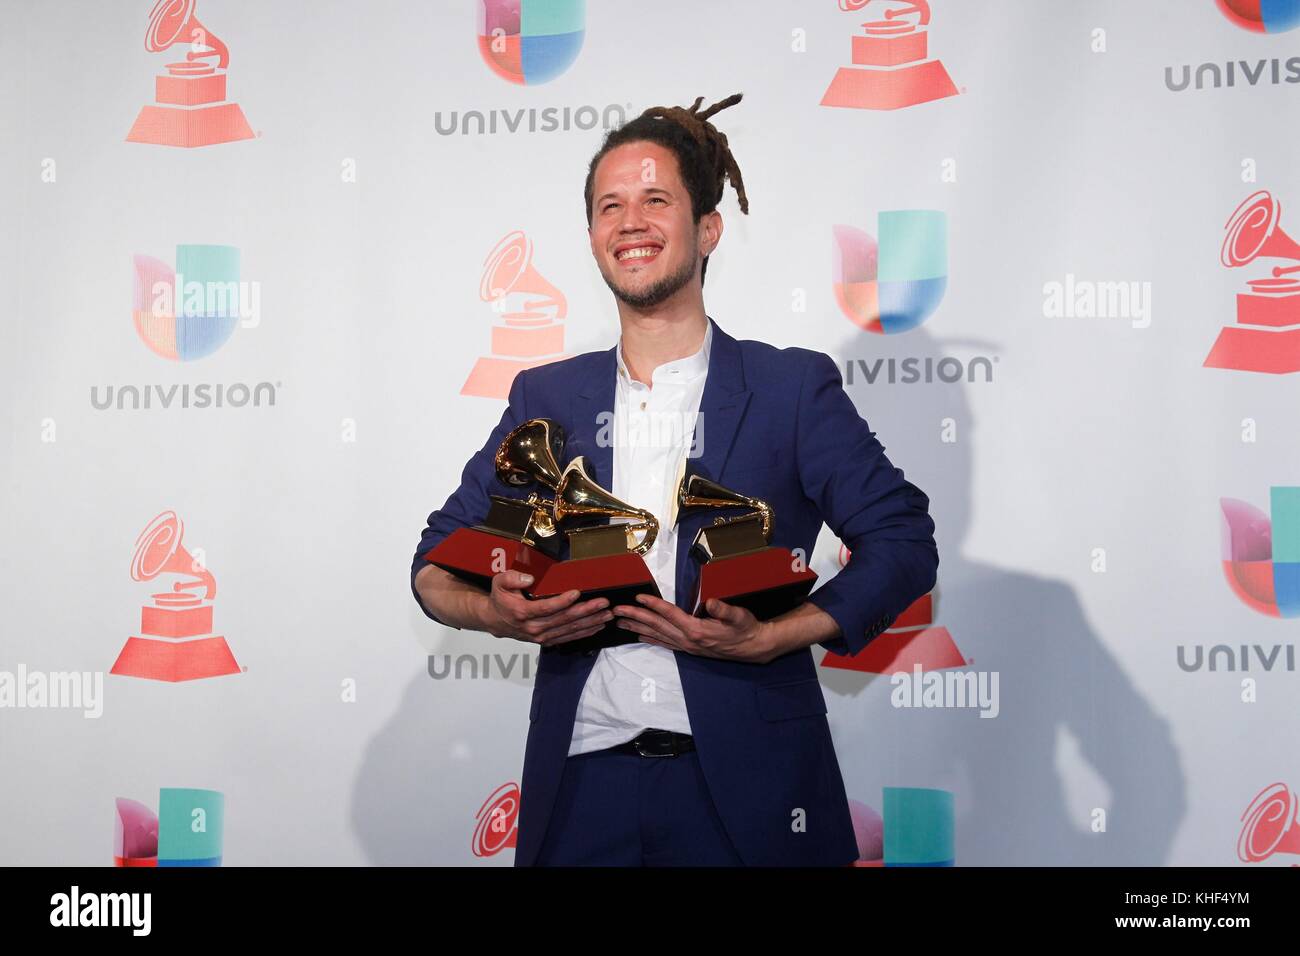 Las Vegas, NV, USA. 16th Nov, 2017. Vicente Garcia, Best New Artist, Best Singer-Songwriter Album (A La Mar) and Best Tropical Song (Bachata En Kingston) in the press room for 18th Annual Latin Grammy Awards Show - Press Room, MGM Grand Garden Arena, Las Vegas, NV November 16, 2017. Credit: JA/Everett Collection/Alamy Live News Stock Photo